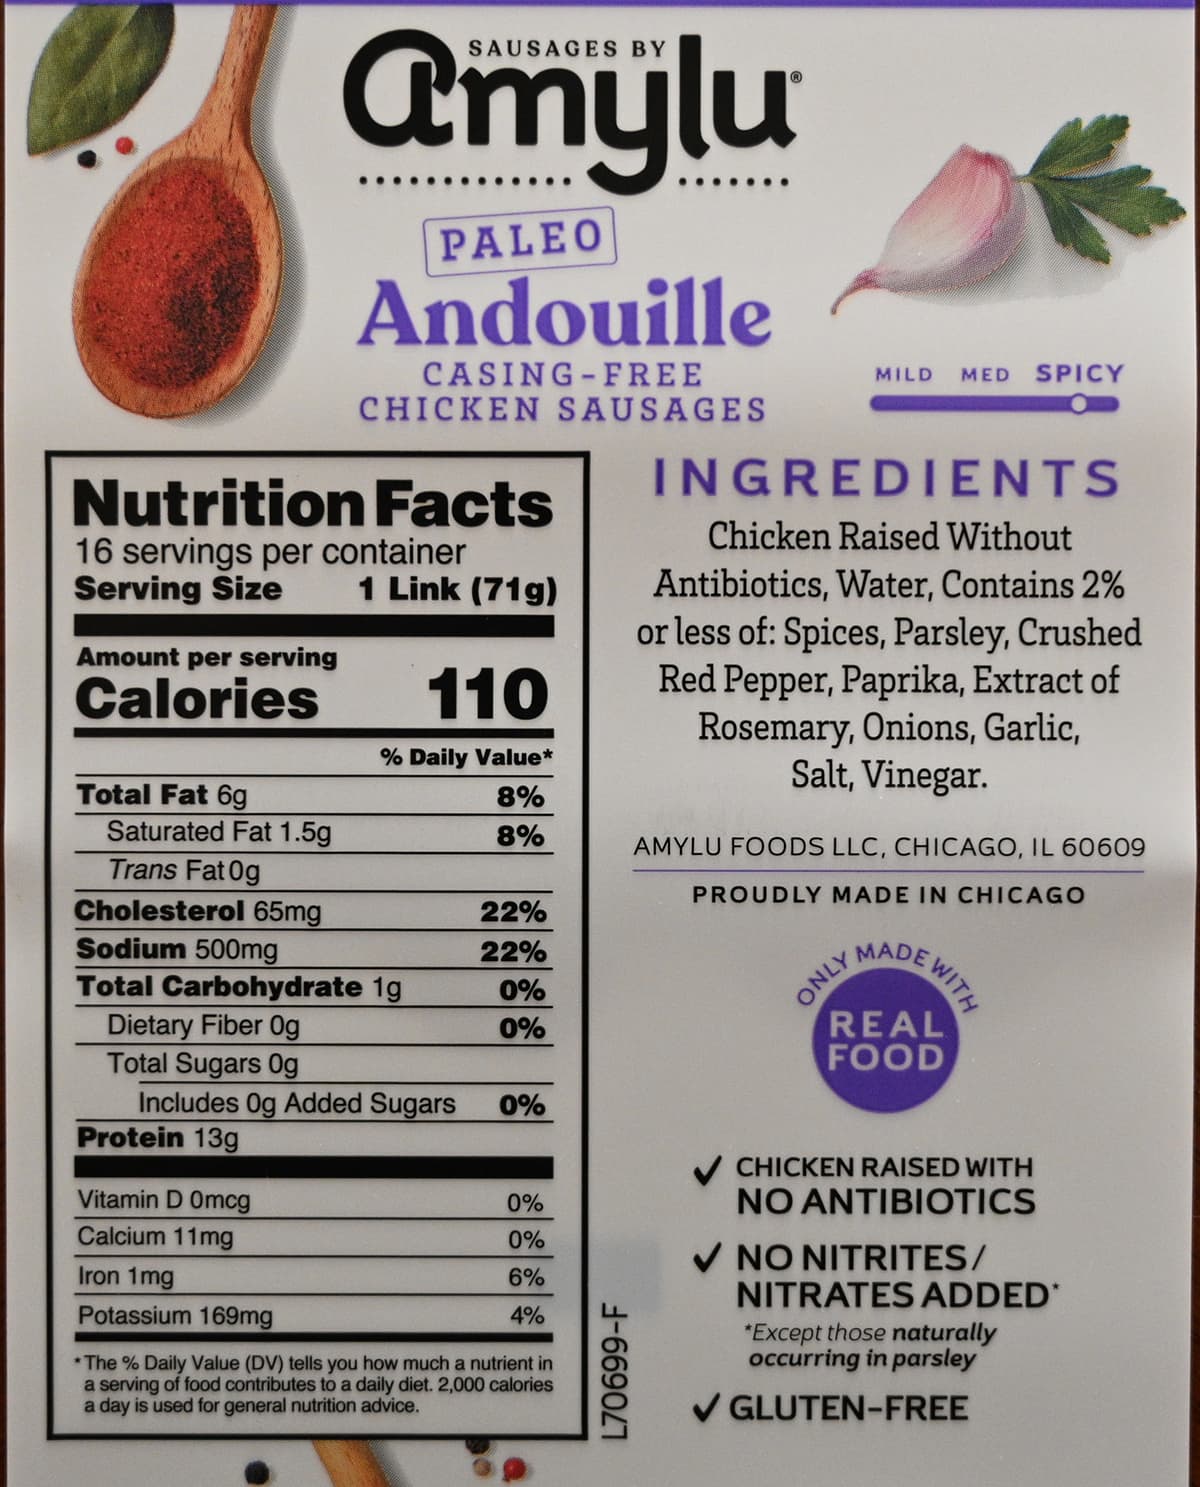 Image of the back of the package of the andouille sausages with nutrition facts, ingredients.